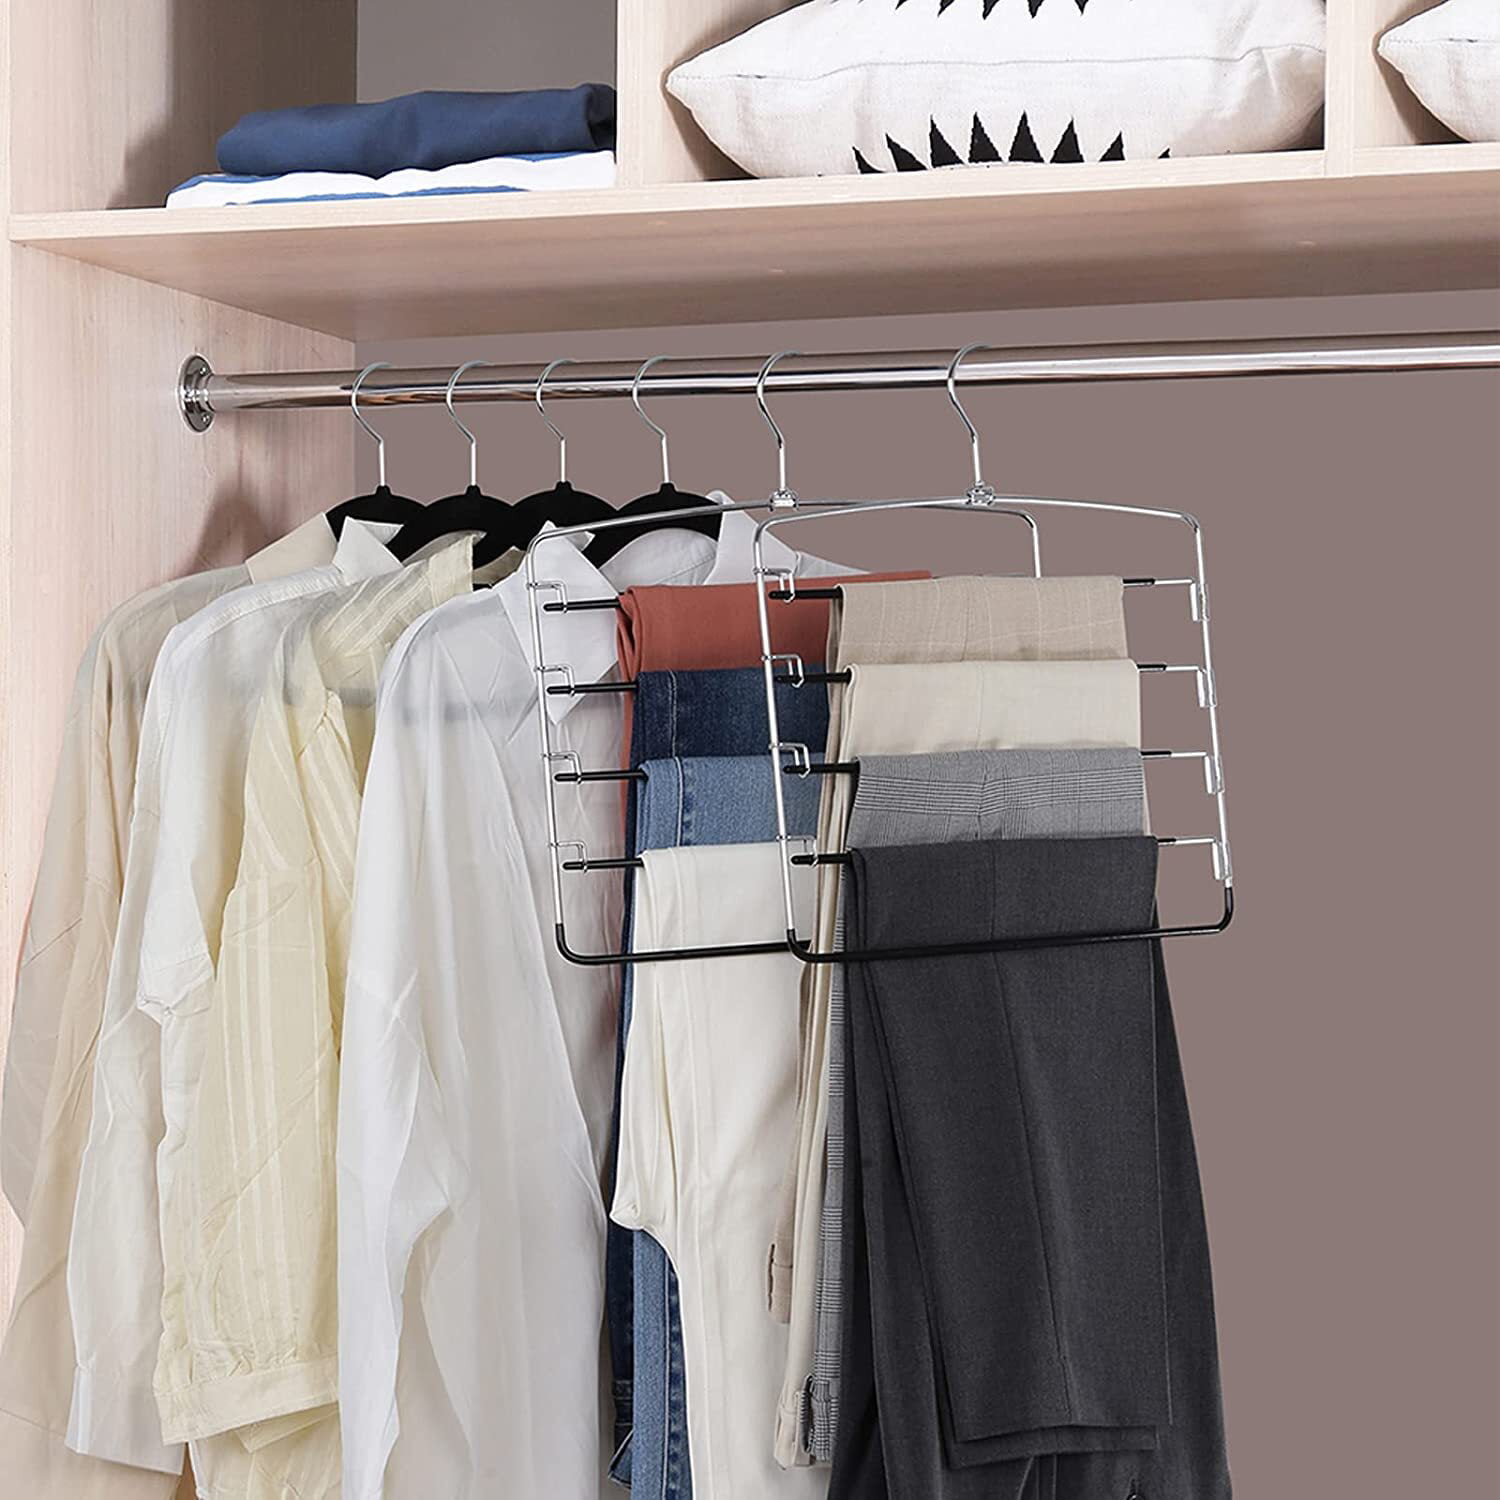 Clothes Hangers Space Saving Coat Hangers Znben Non Slip Shirt Hangers with  Padded Foam Stainless Steel 5 in 1 Heavy Duty Closet Organizer for Hoodie